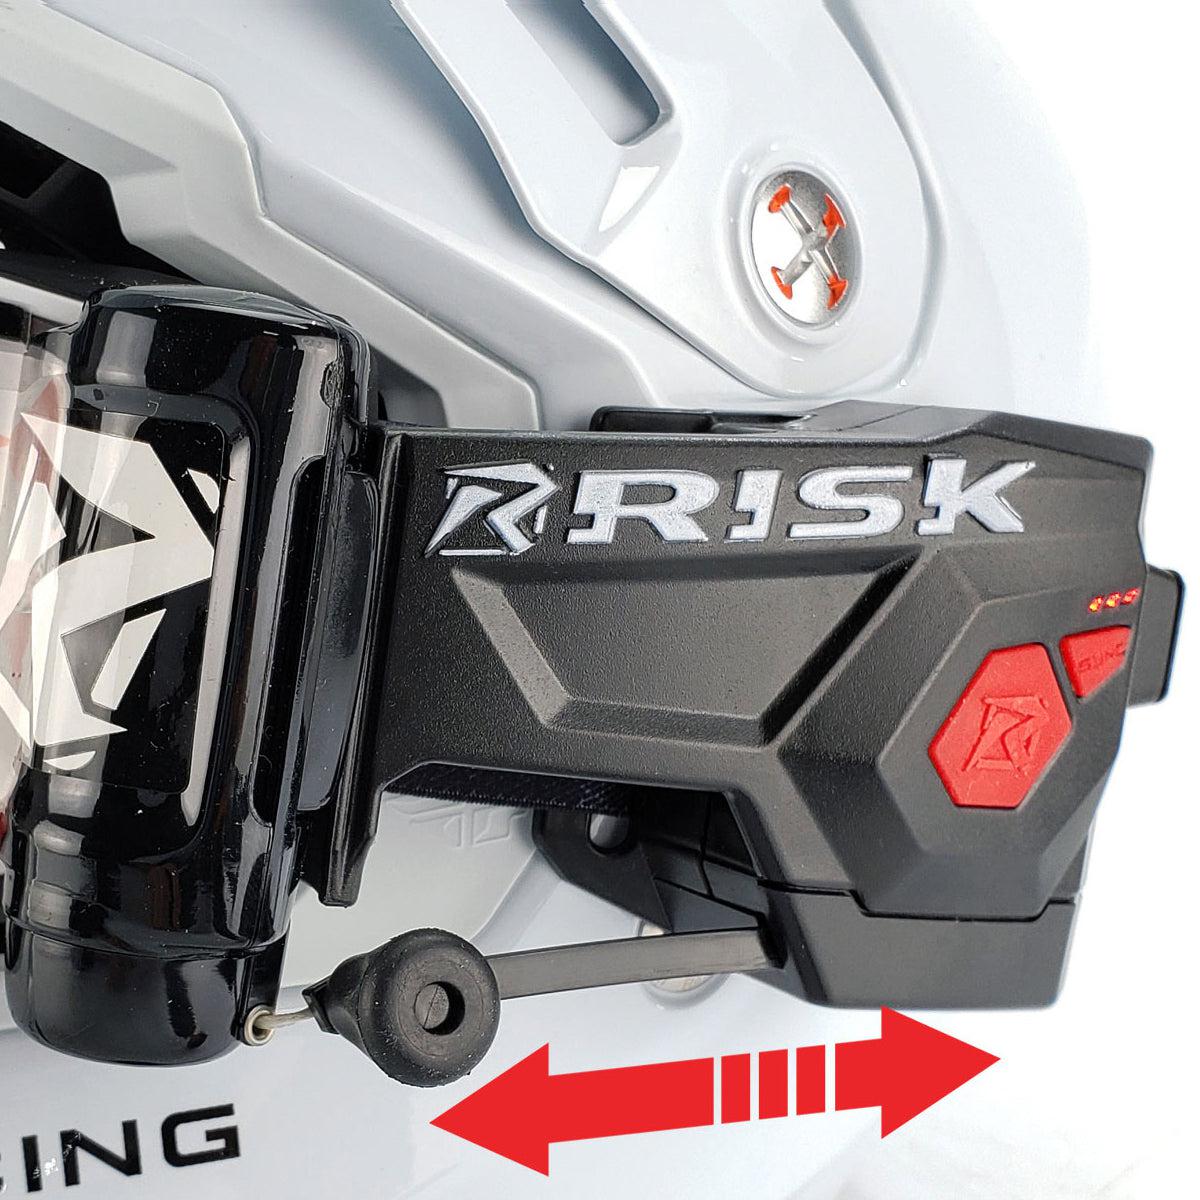 RIPPER - Universal Automated Electronic Goggle Roll-Off System by Risk Racing